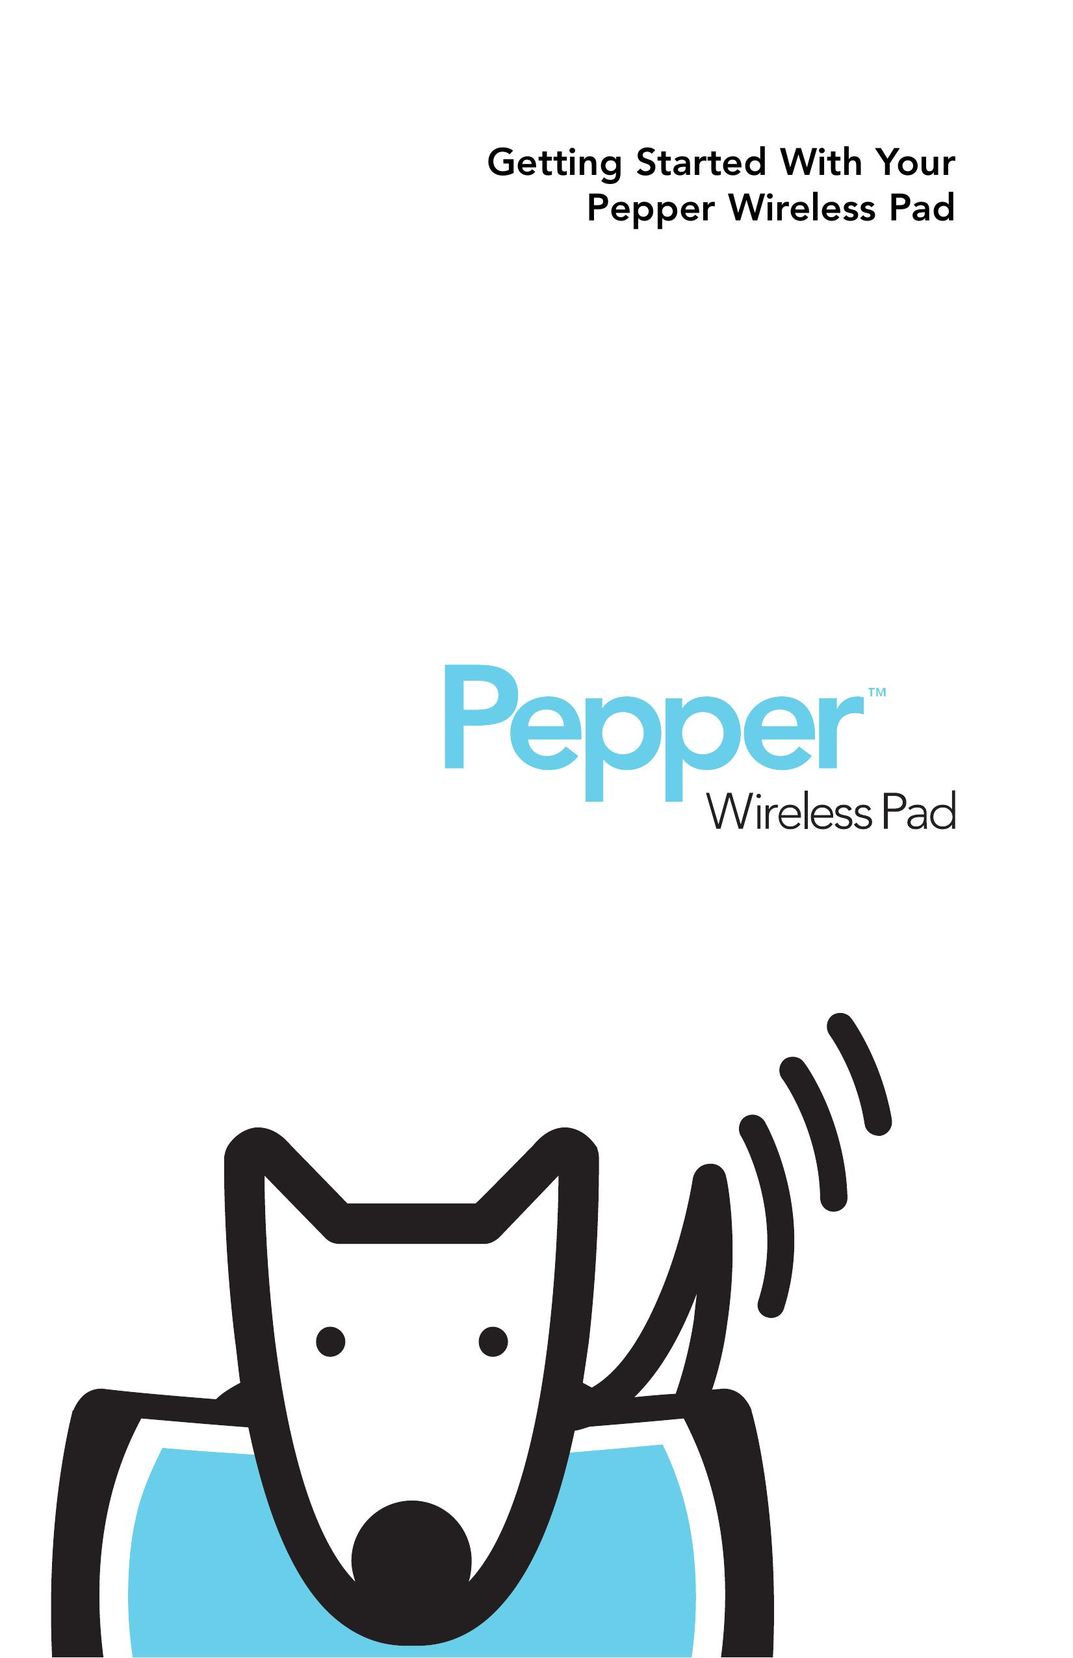 Pepper Computer Wireless Pad Network Card User Manual